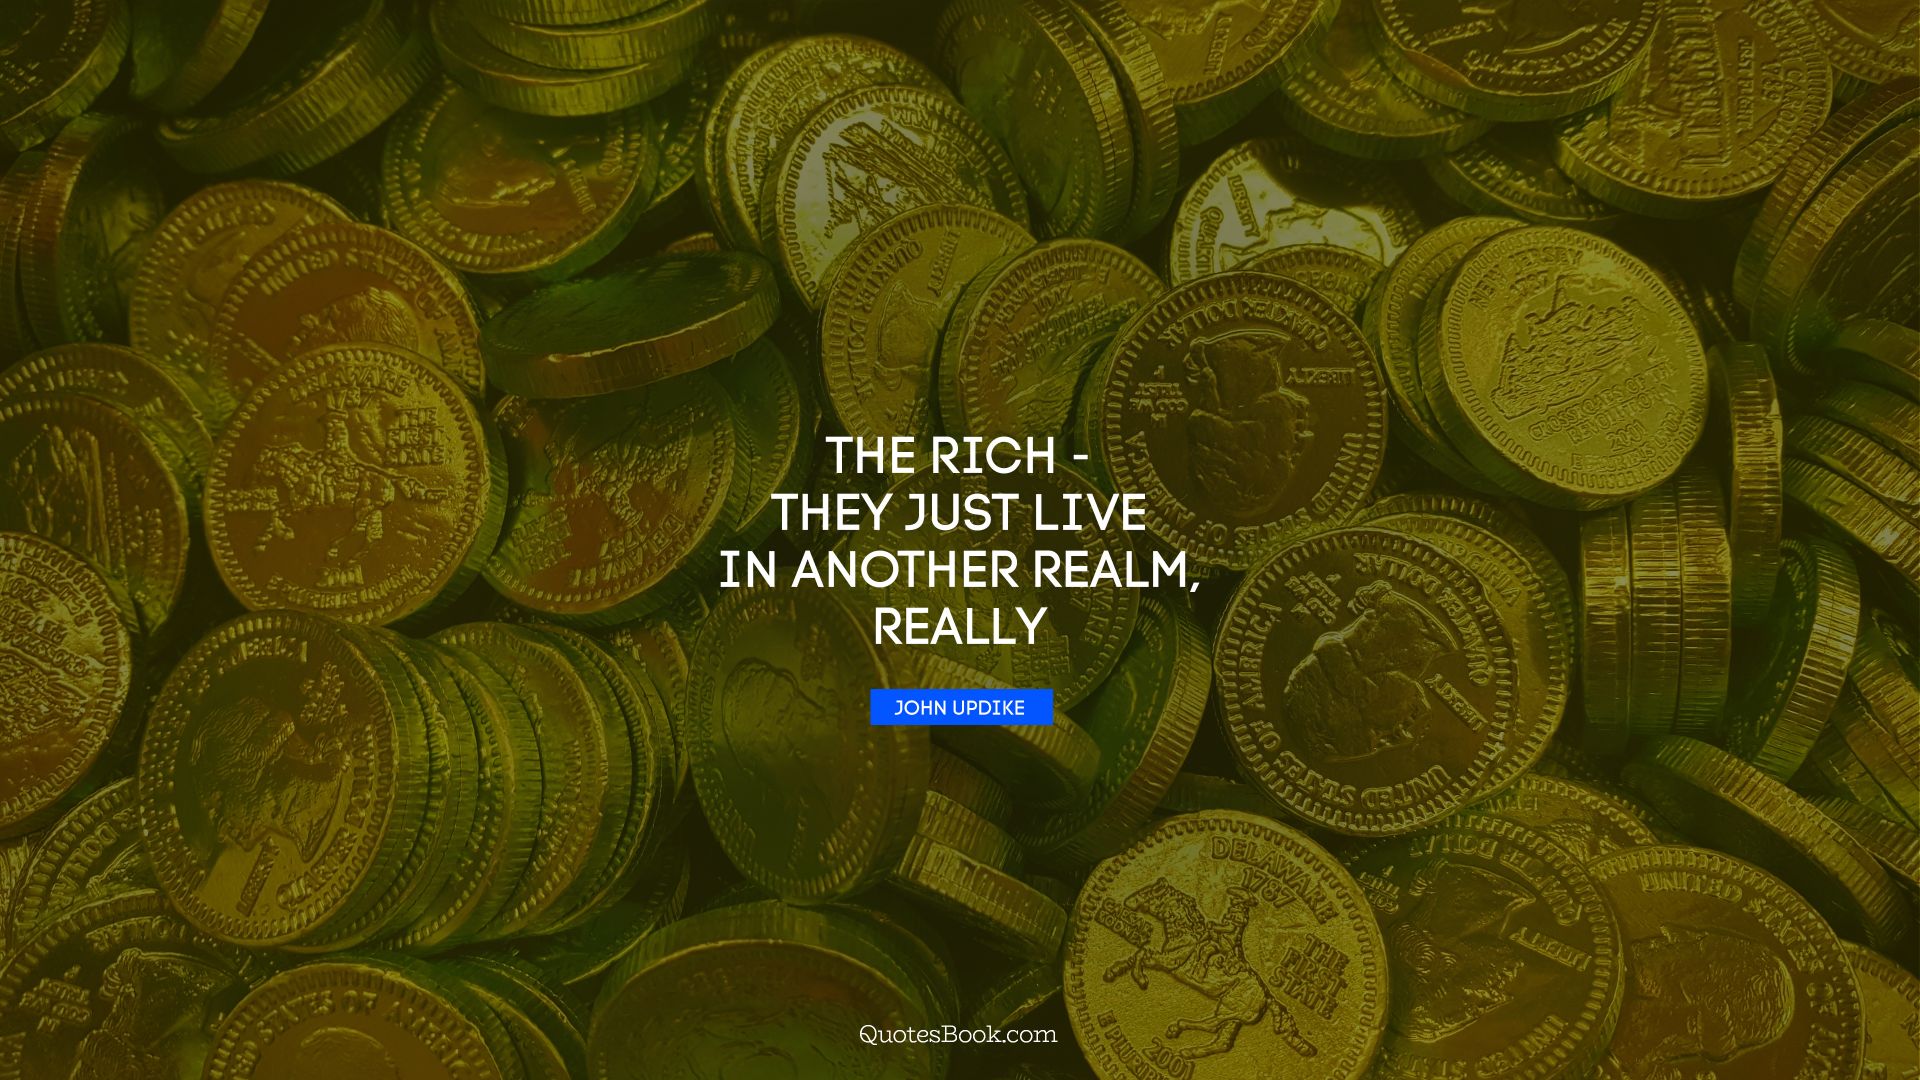 The rich - they just live in another realm, really. - Quote by John Updike